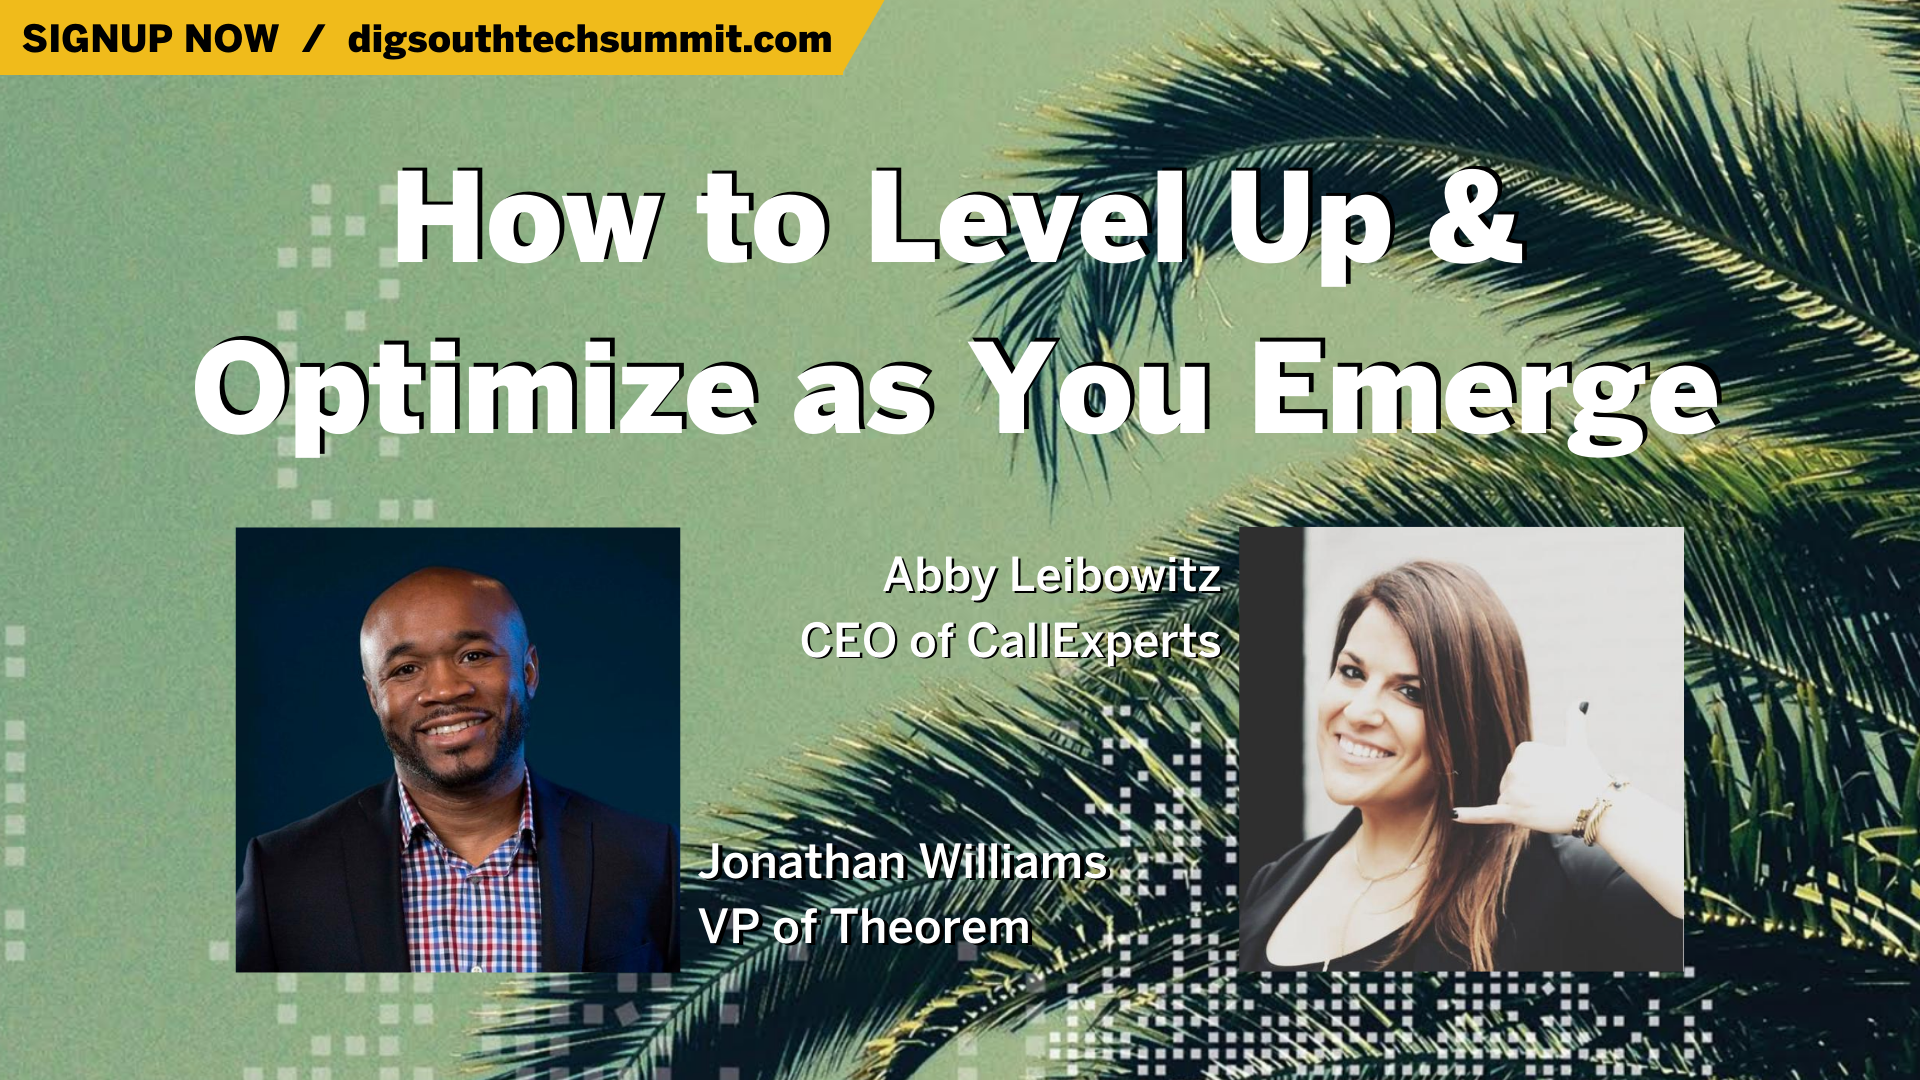 Level Up & Optimize with Abby Leibowitz and Jonathan Williams